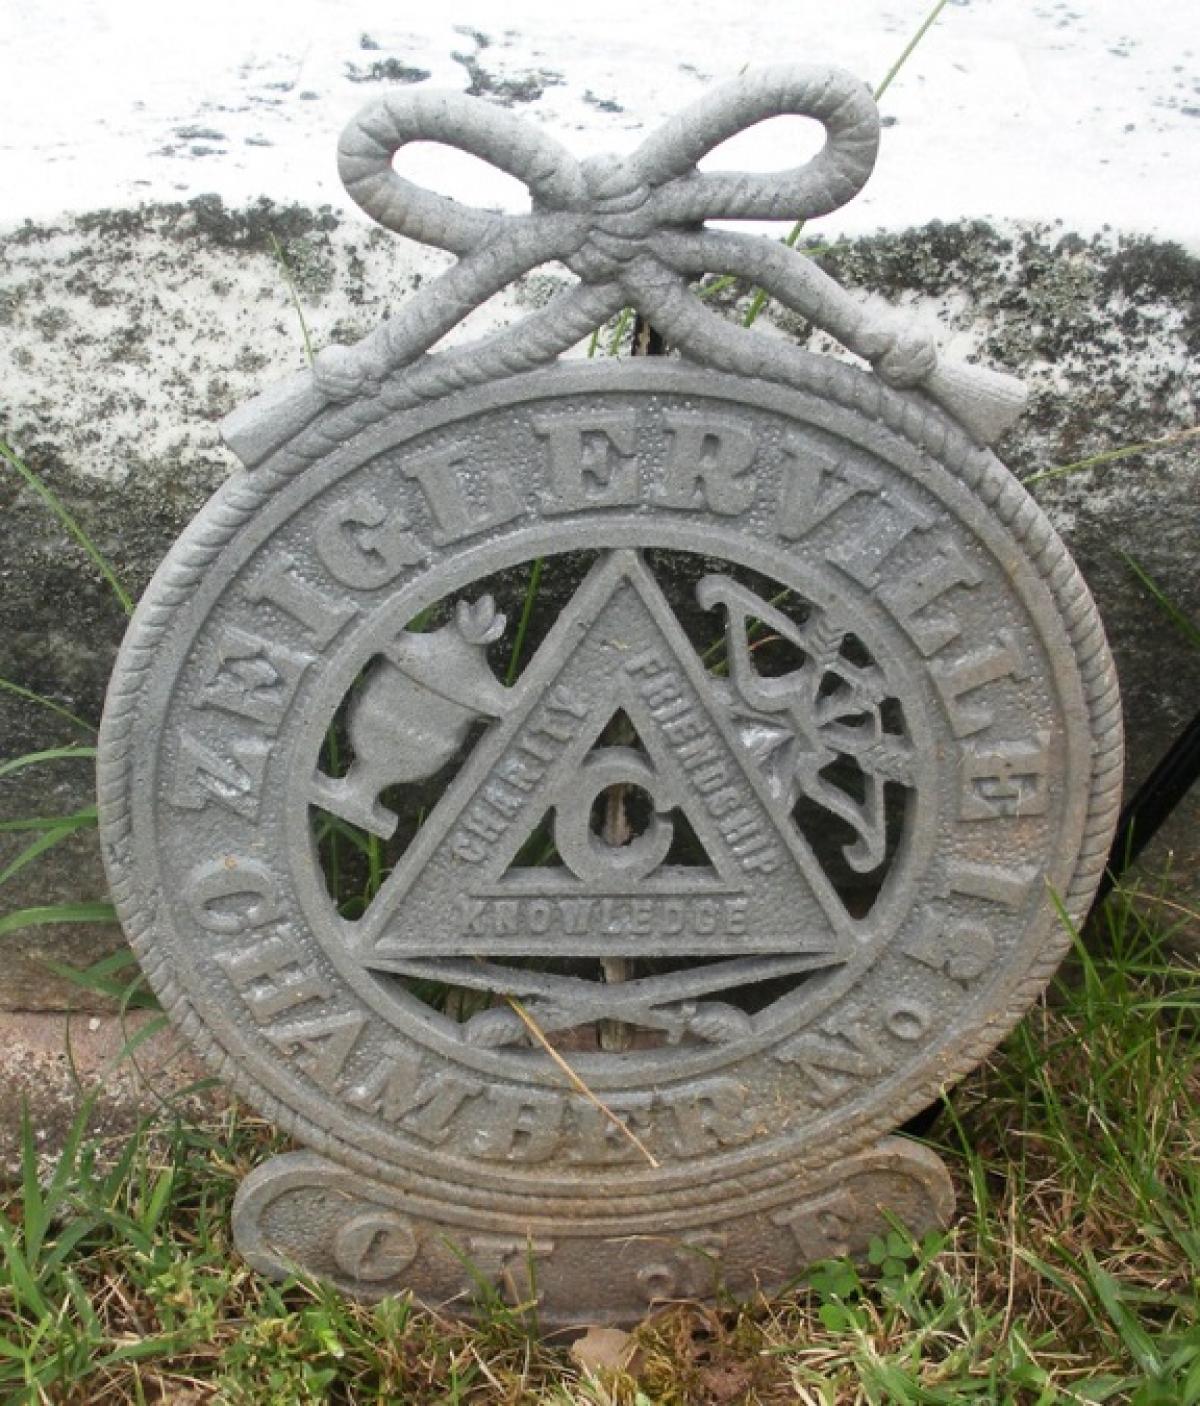 OK, Grove, Headstone Symbols and Meanings, Order Knights of Friendship